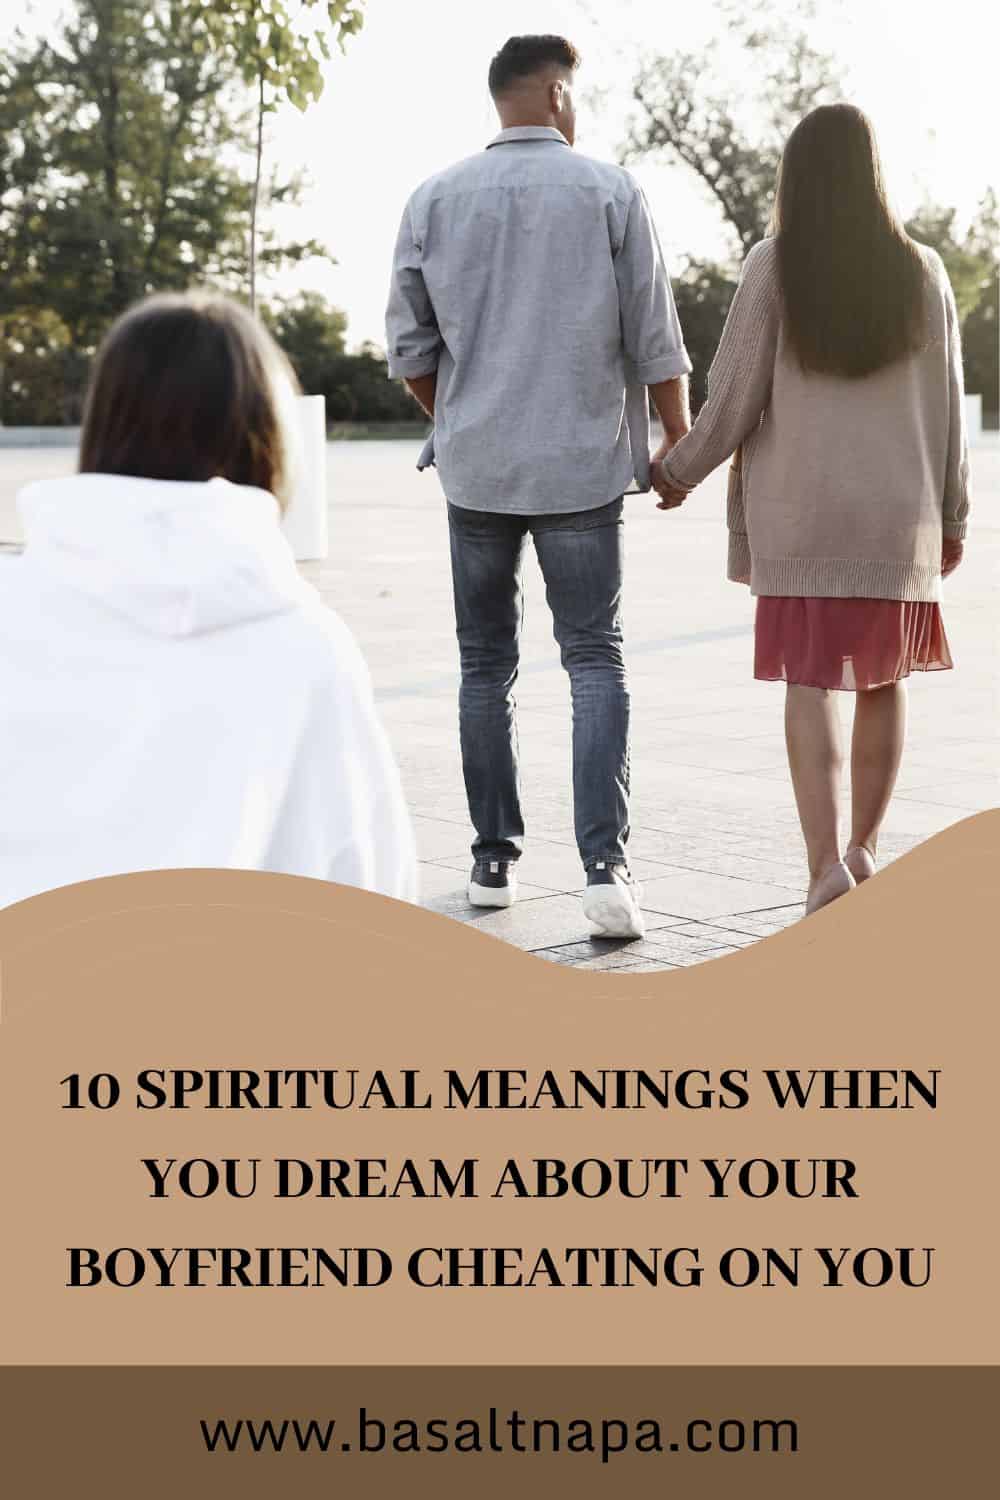 10 Spiritual Meanings When You Dream About Your Boyfriend Cheating on You